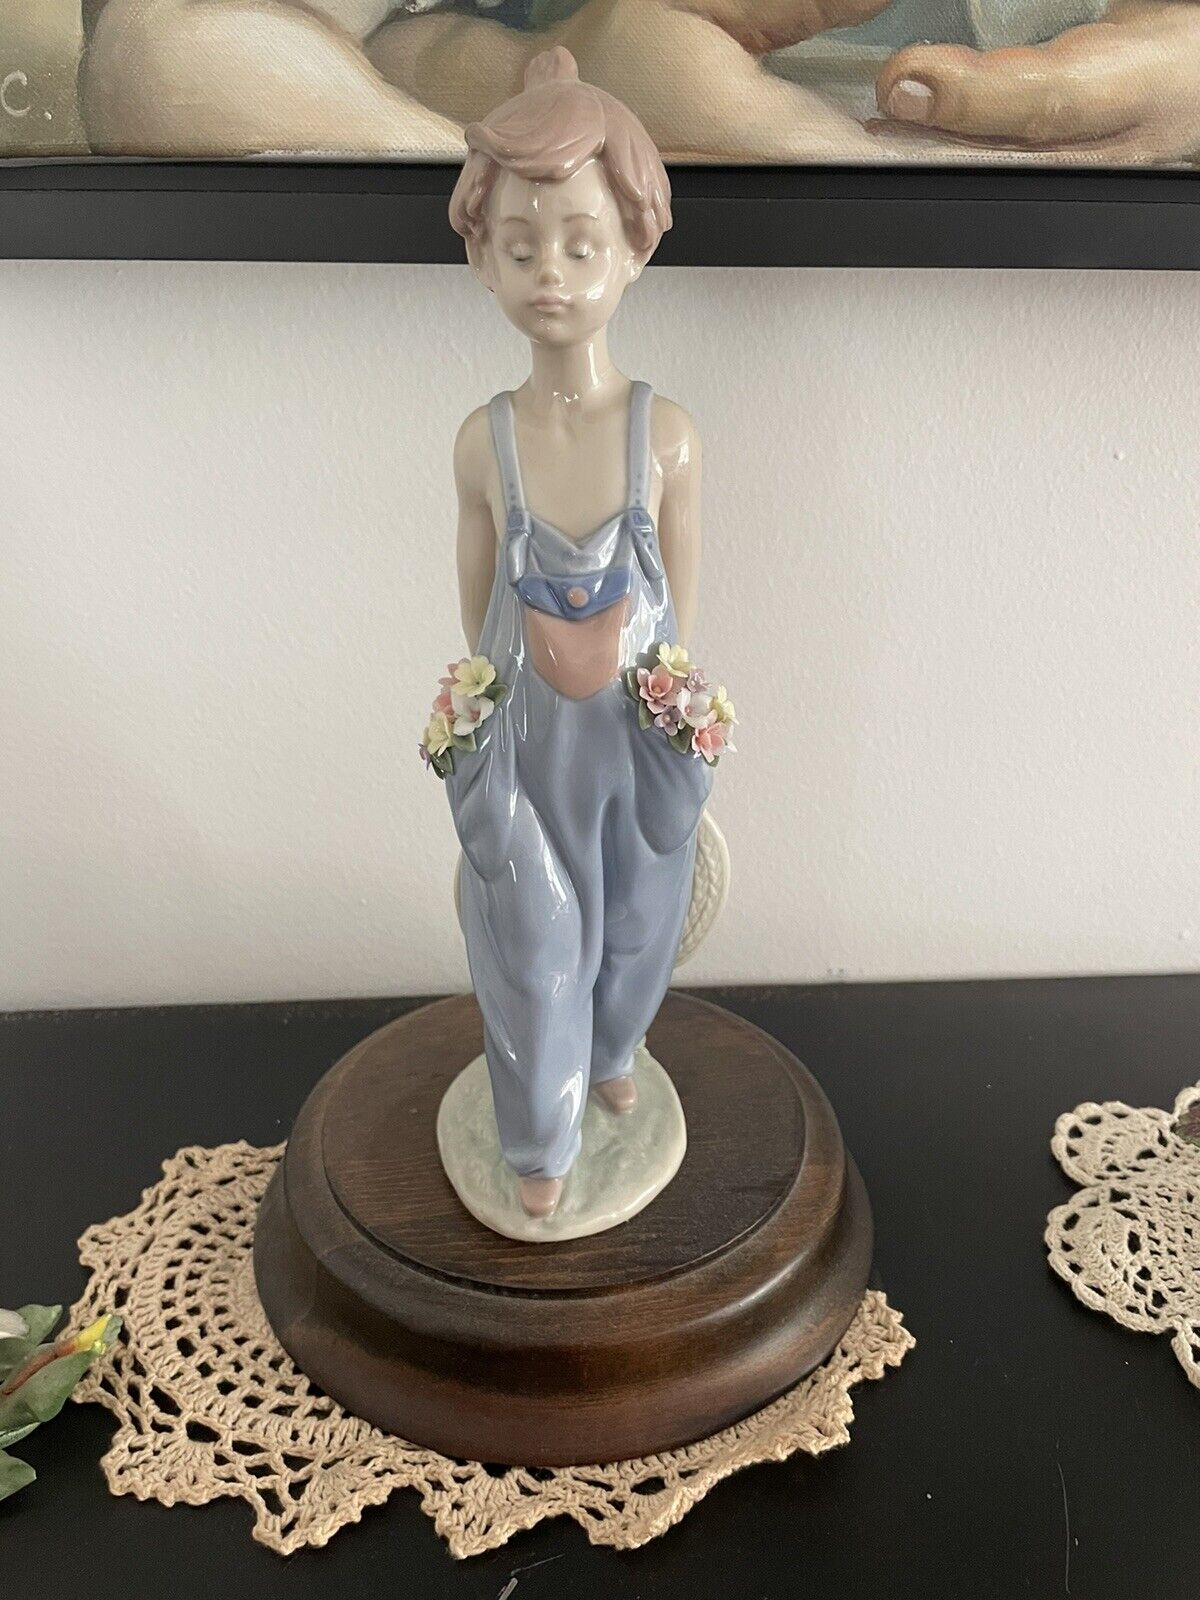 Authentic Lladro’s Lot 19 Pieces For Sale 760.00 Comes Out To 40.00 For Each.